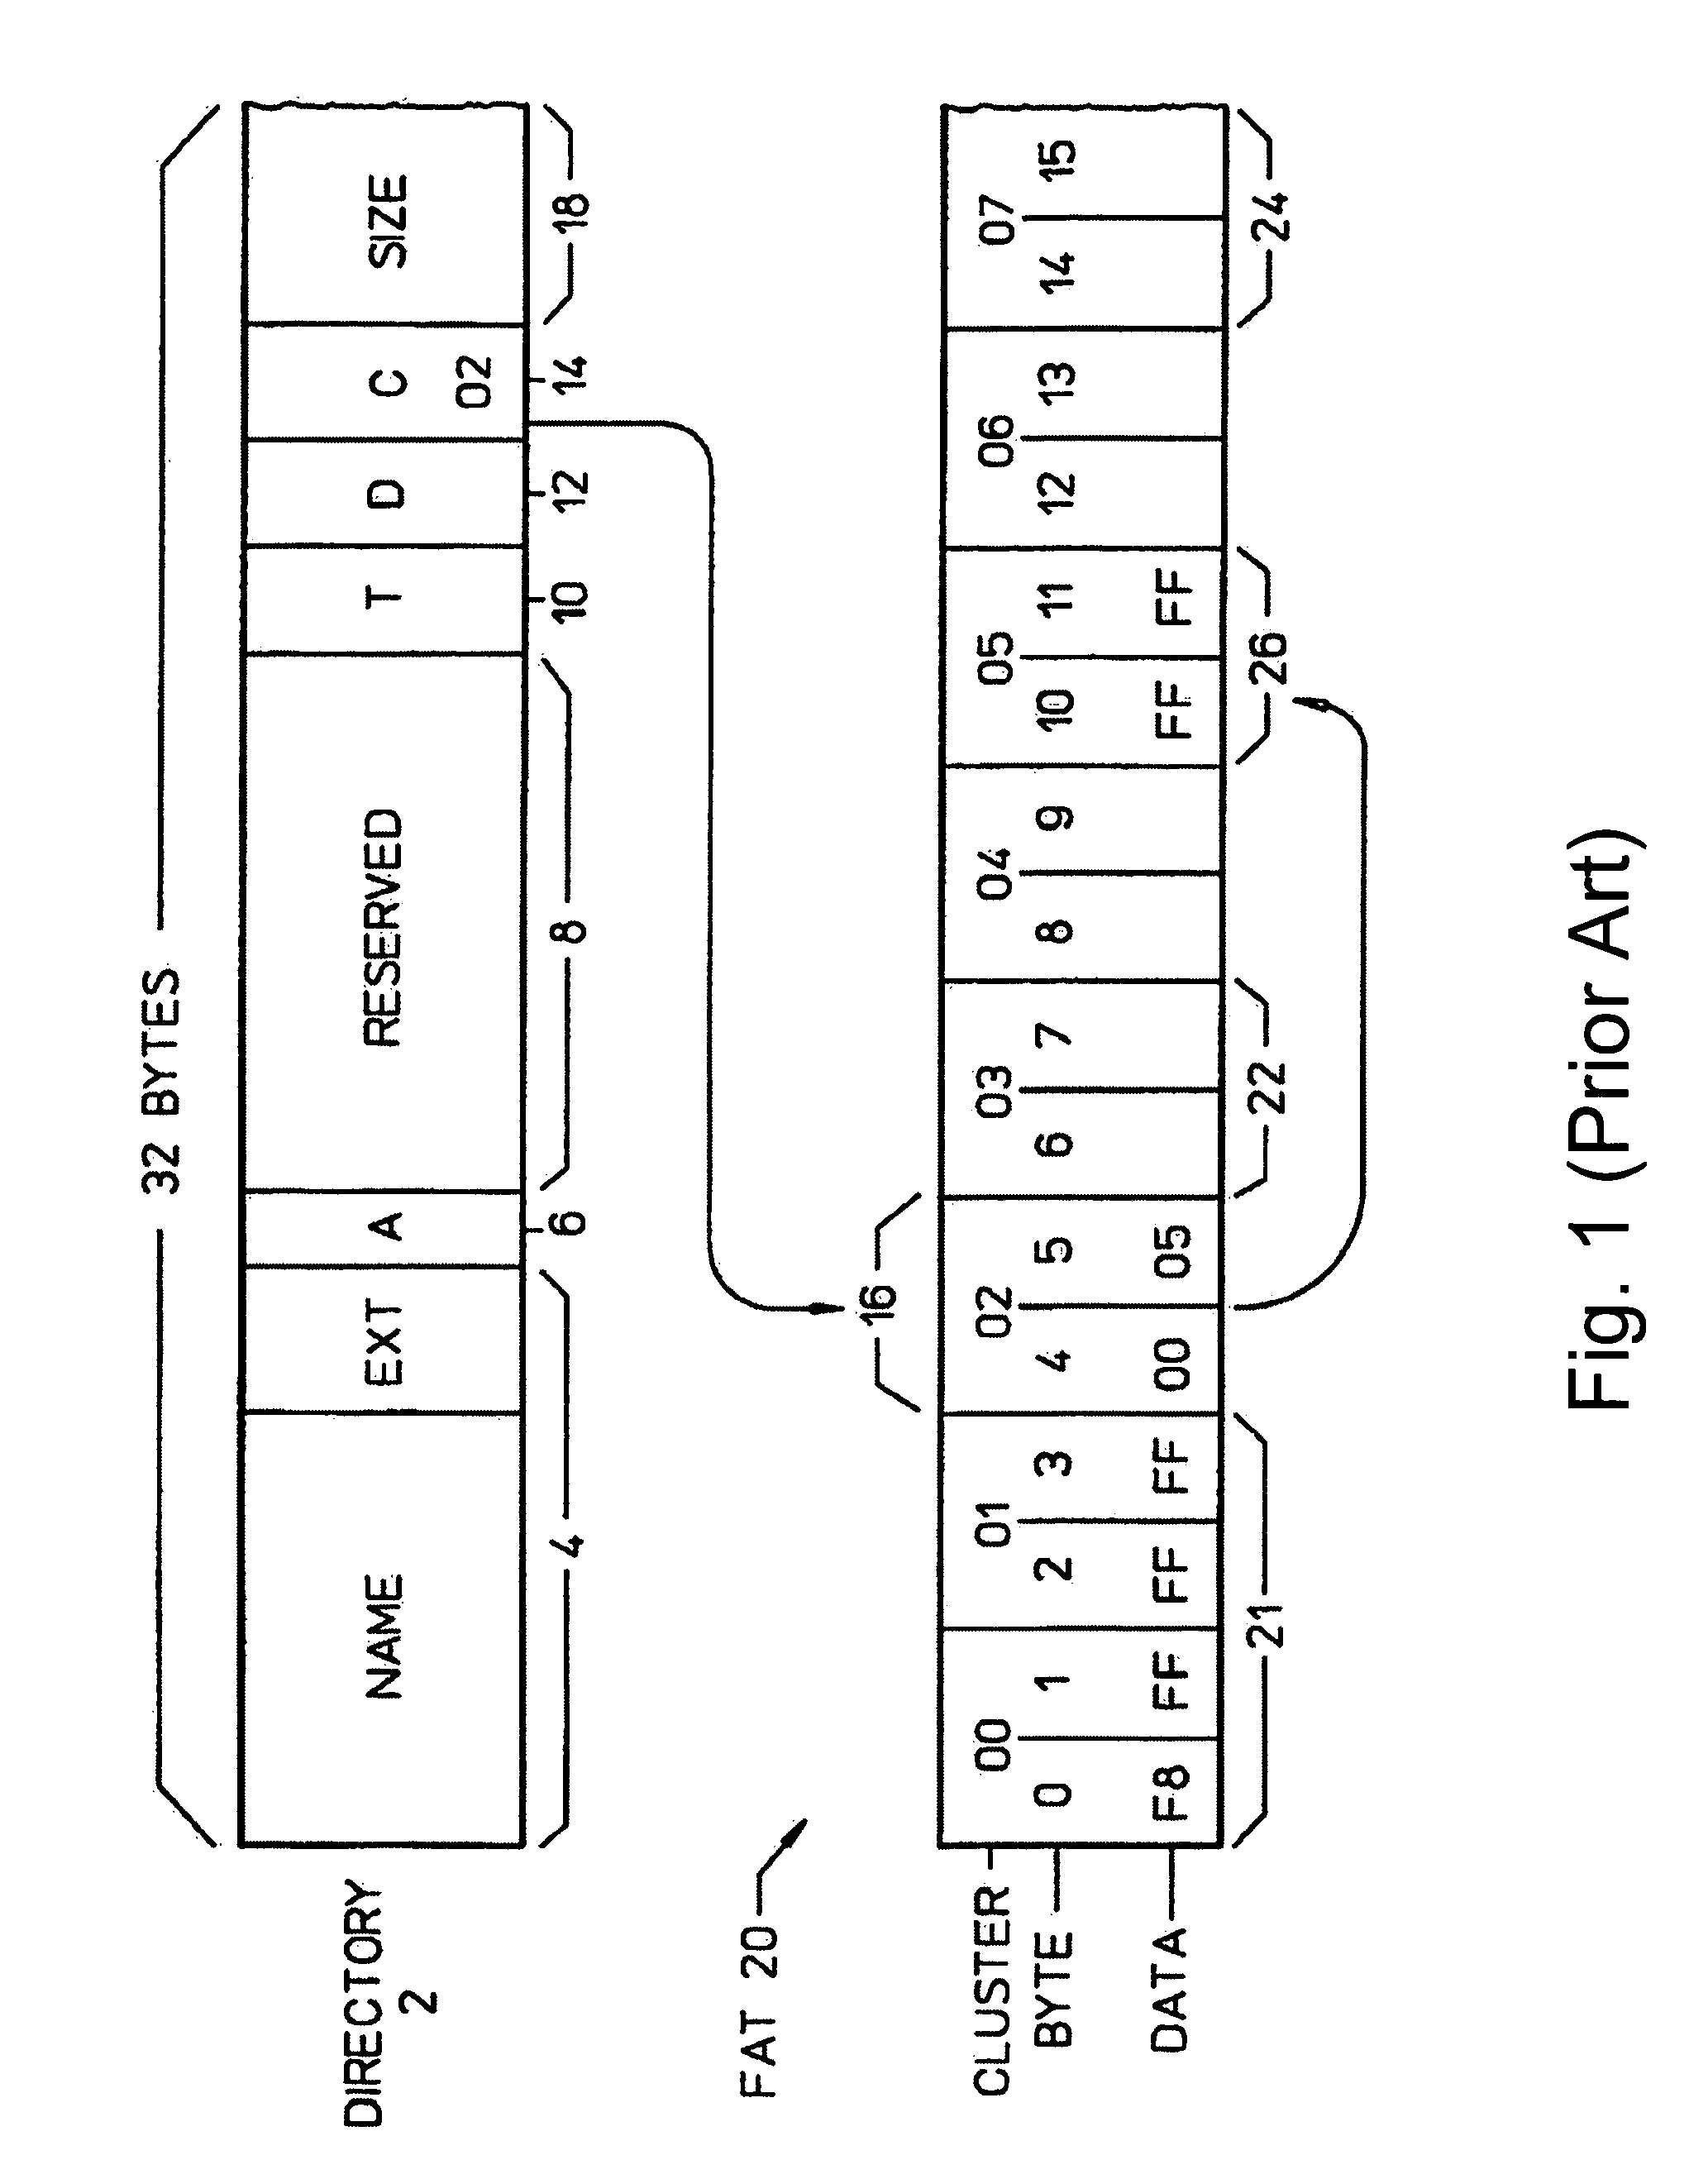 System and method for performing integrated storage operations